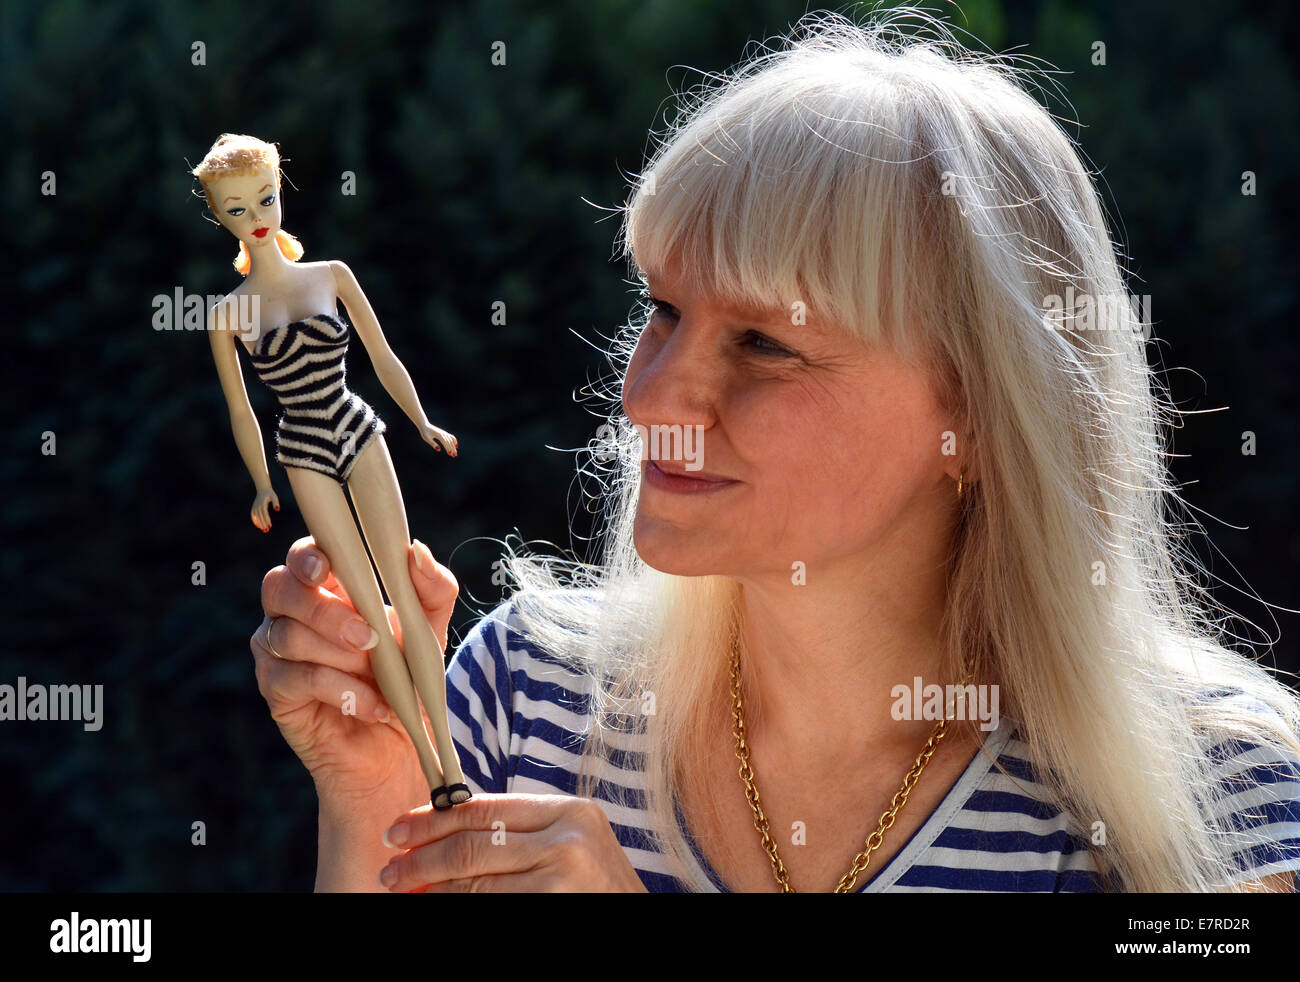 Correspondent Analytisch hoe te gebruiken Duesseldorf, Germany. 12th Sep, 2014. dpa-Exclusive - The Barbie doll  collector Bettina Dorfmann poses with an original 'Ponytail' Barbie from  1959 in the garden of her house in Duesseldorf, Germany, 12 September